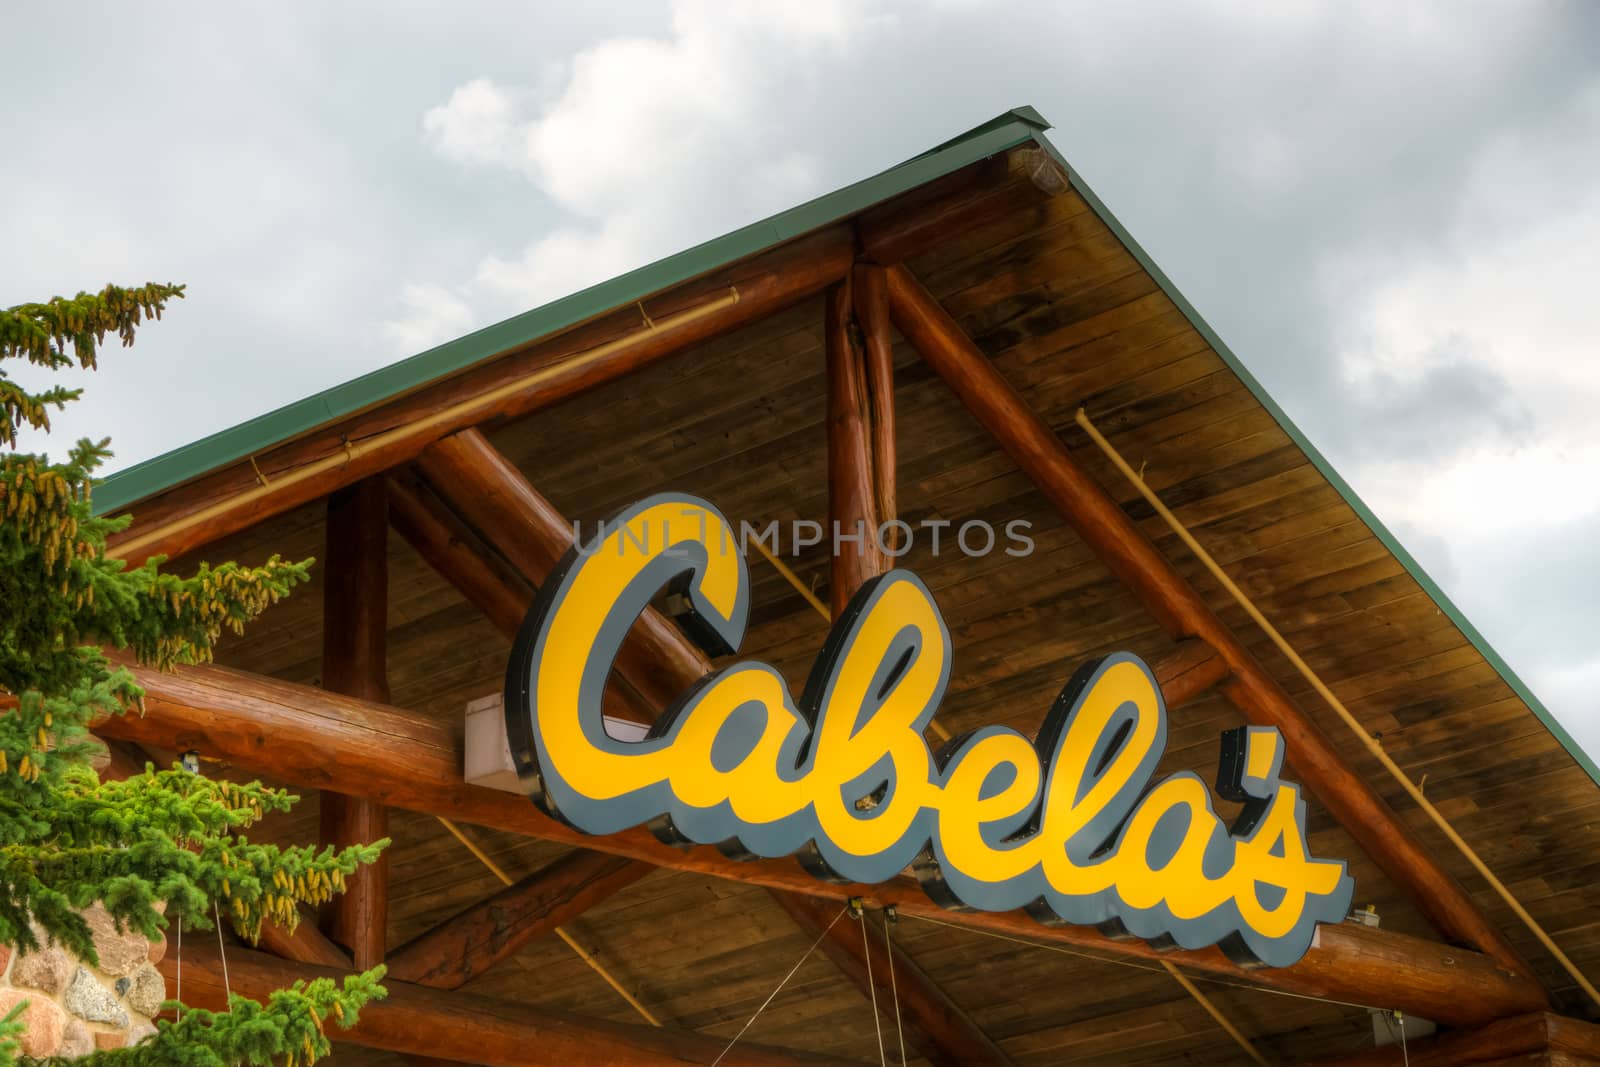 Cabela's Retail Store Exterior by wolterk